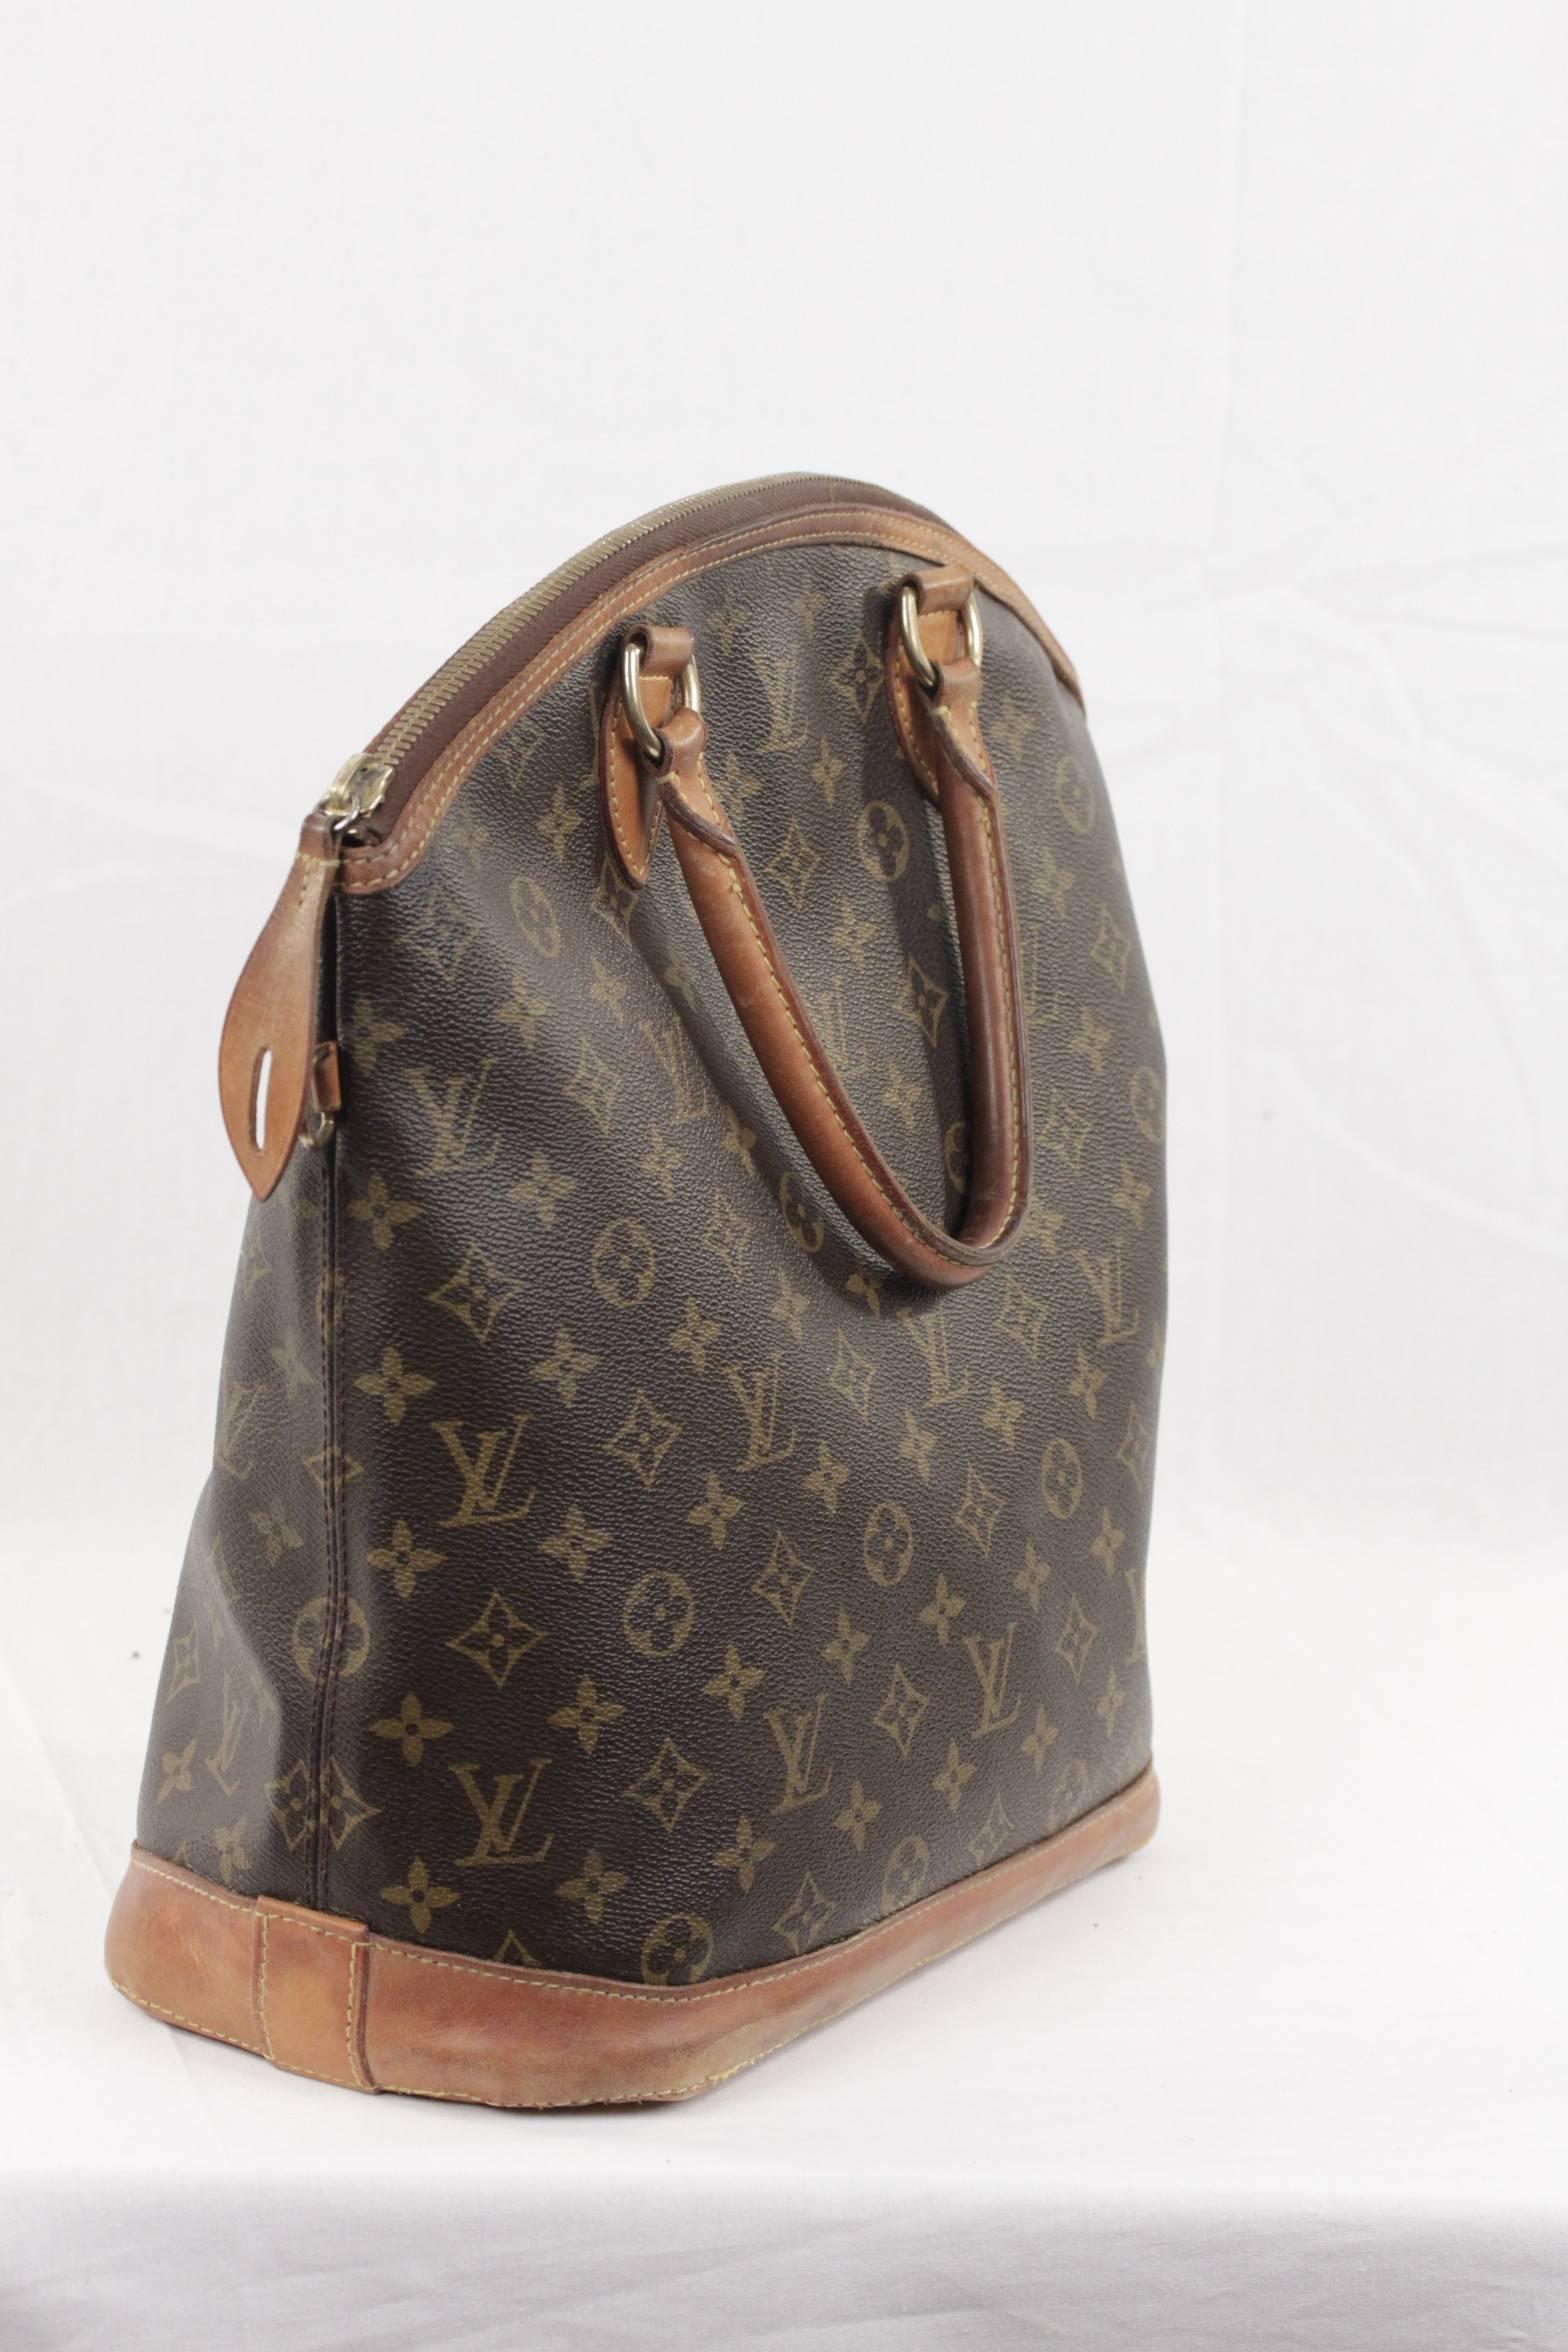  - Monogram Canvas

- Natural Cowhide Leather trim

- Two handles

- Zip closure

- Textile lining

- D-Ring

- 2 open pockets inside and D-ring inside

Logos / Tags: 'LOUIS VUITTON Paris - Made in Spain' tag inside, authenticity